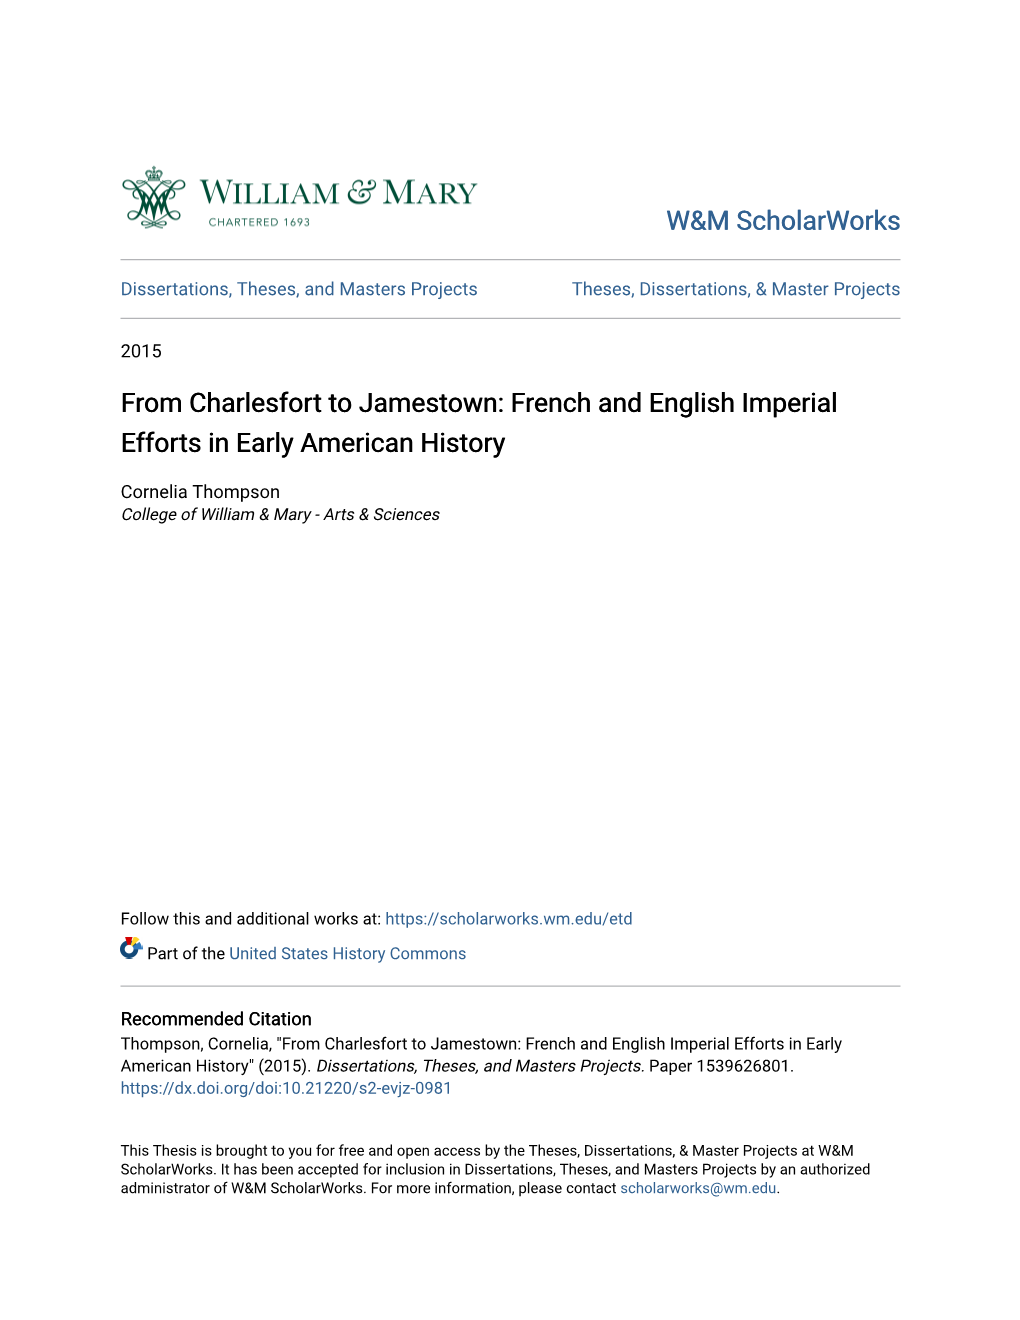 From Charlesfort to Jamestown: French and English Imperial Efforts in Early American History